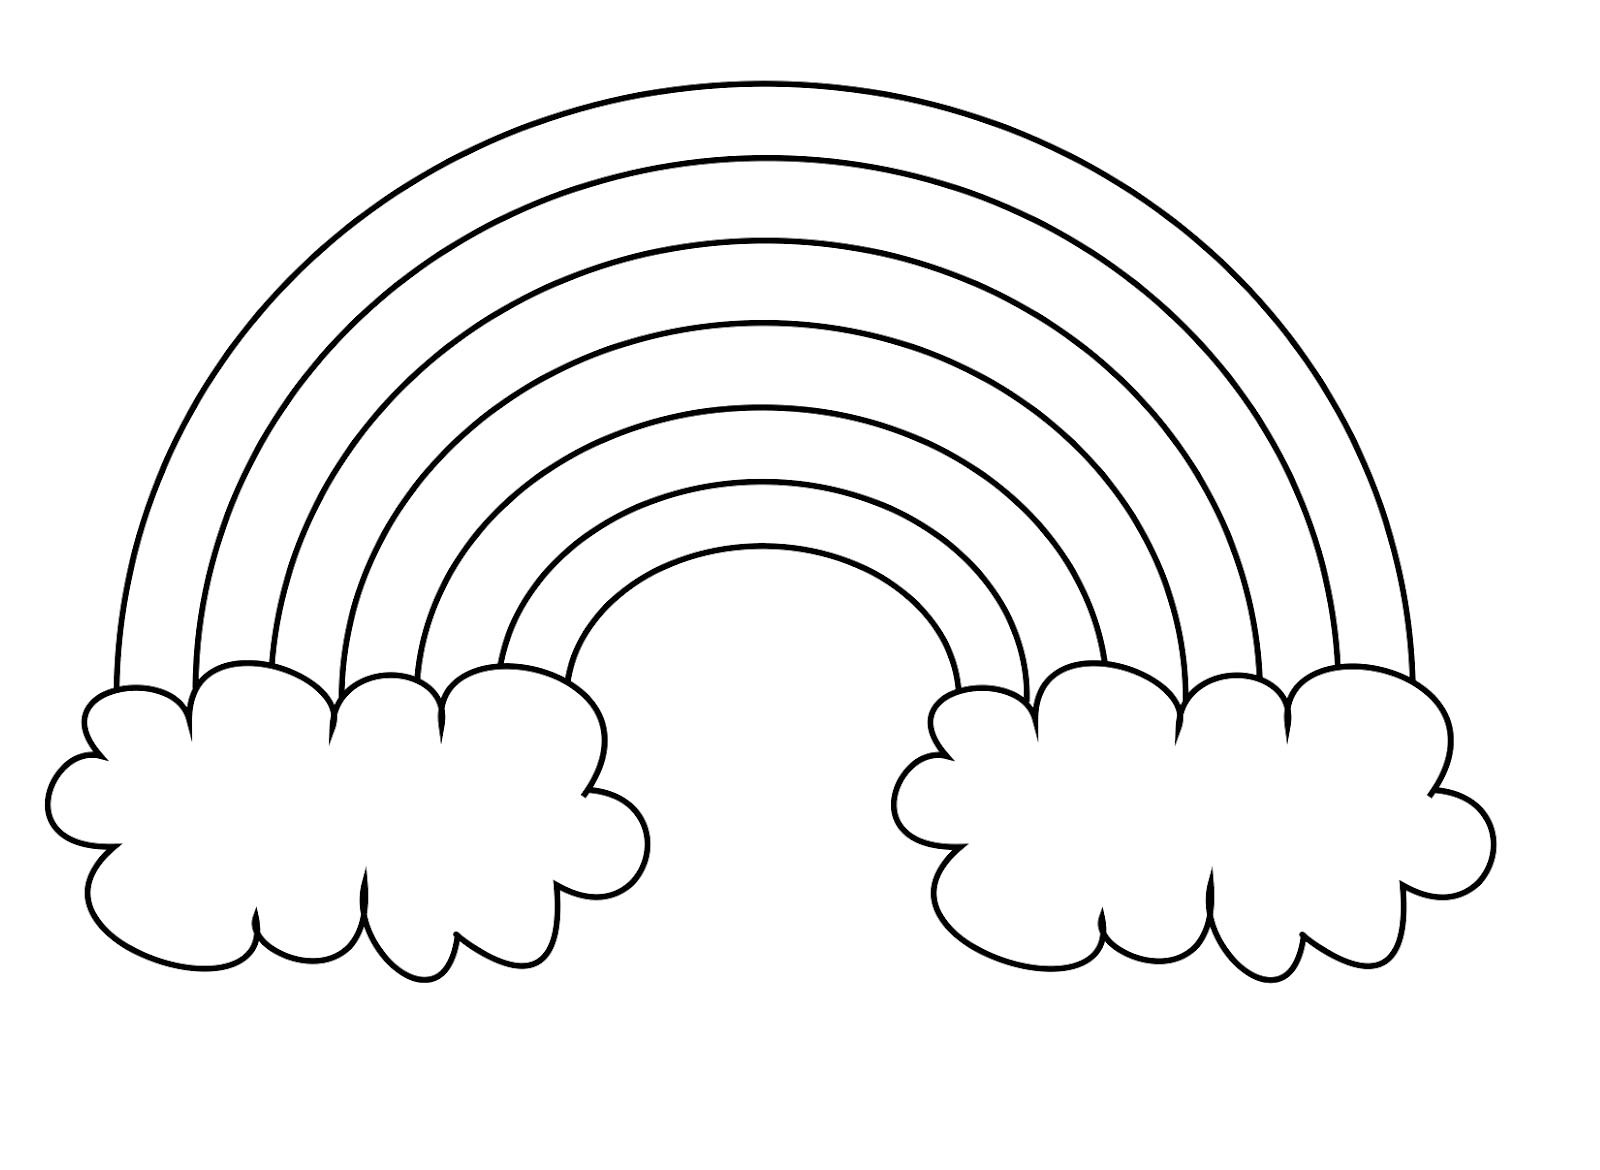 Rainbow Coloring Pages For Toddlers
 Rainbow Coloring Pages